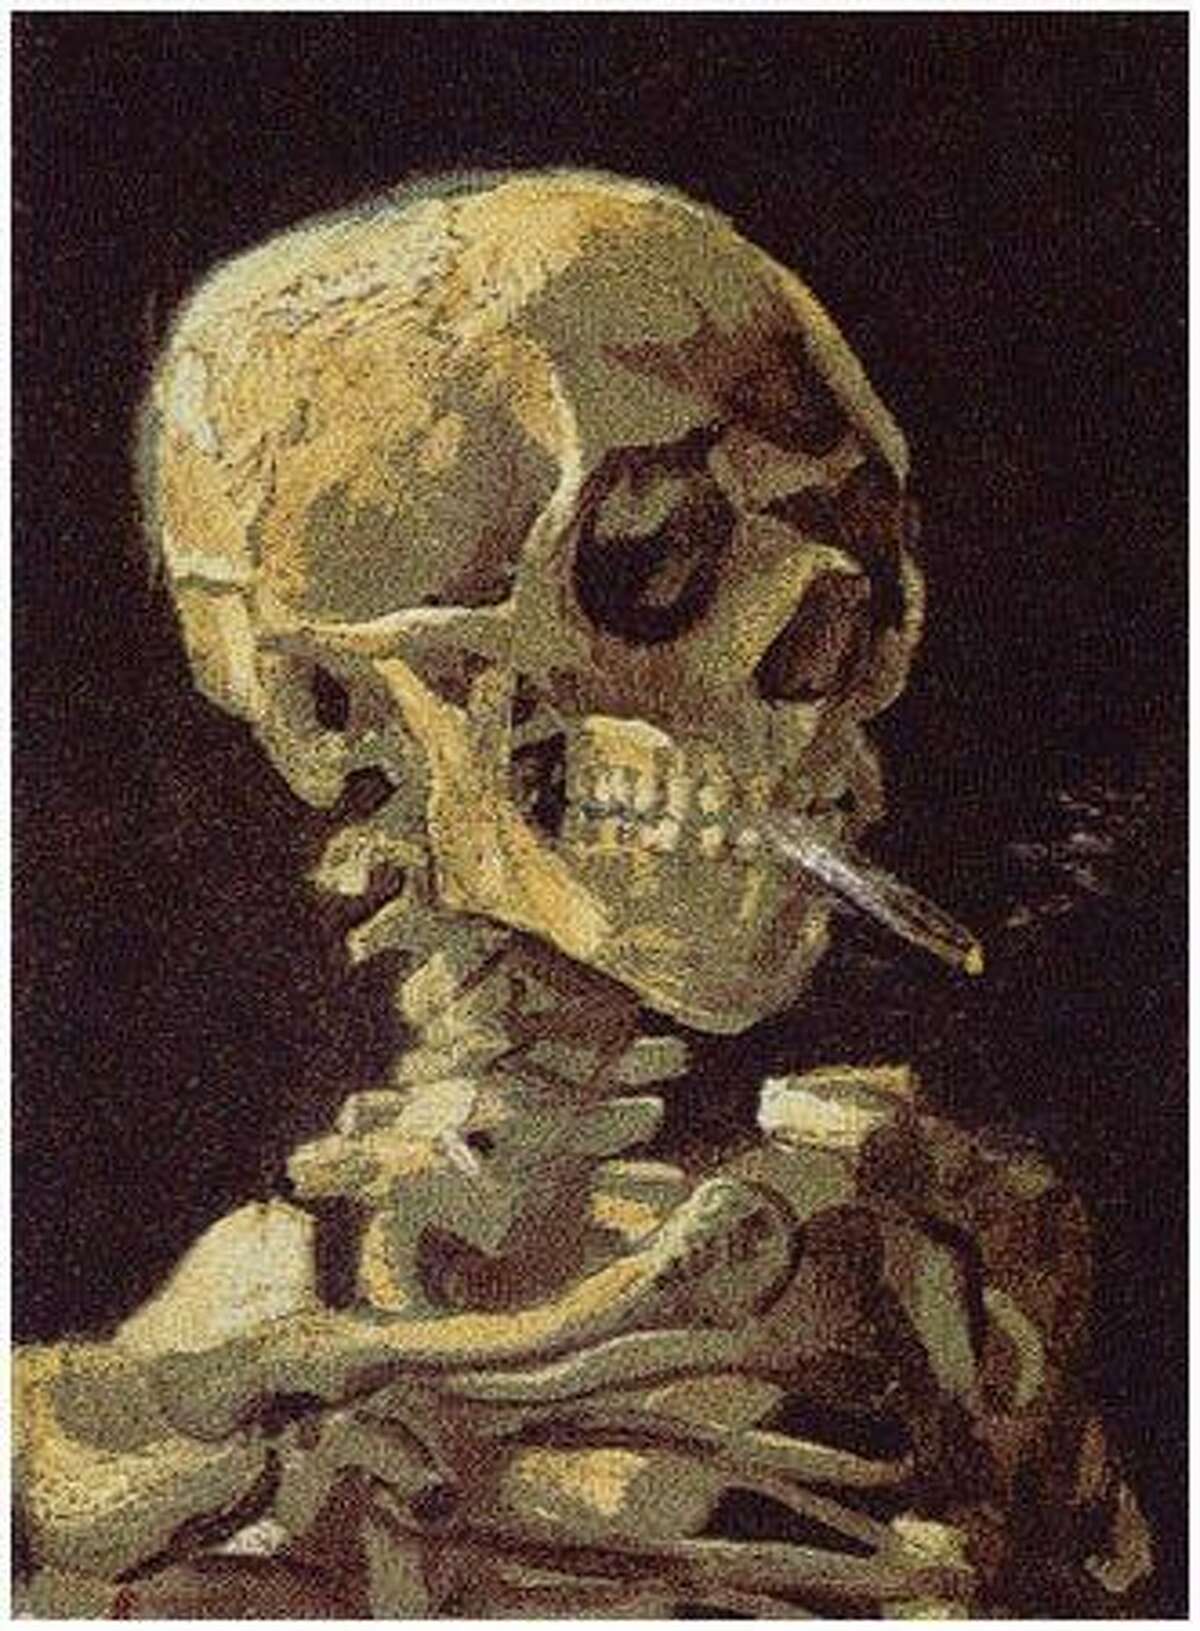 Skull with Cigarette, 2007: Shows 200,000 packs of cigarettes, equal to the number of Americans who then died from cigarette smoking every six months. (Chris Jordan)